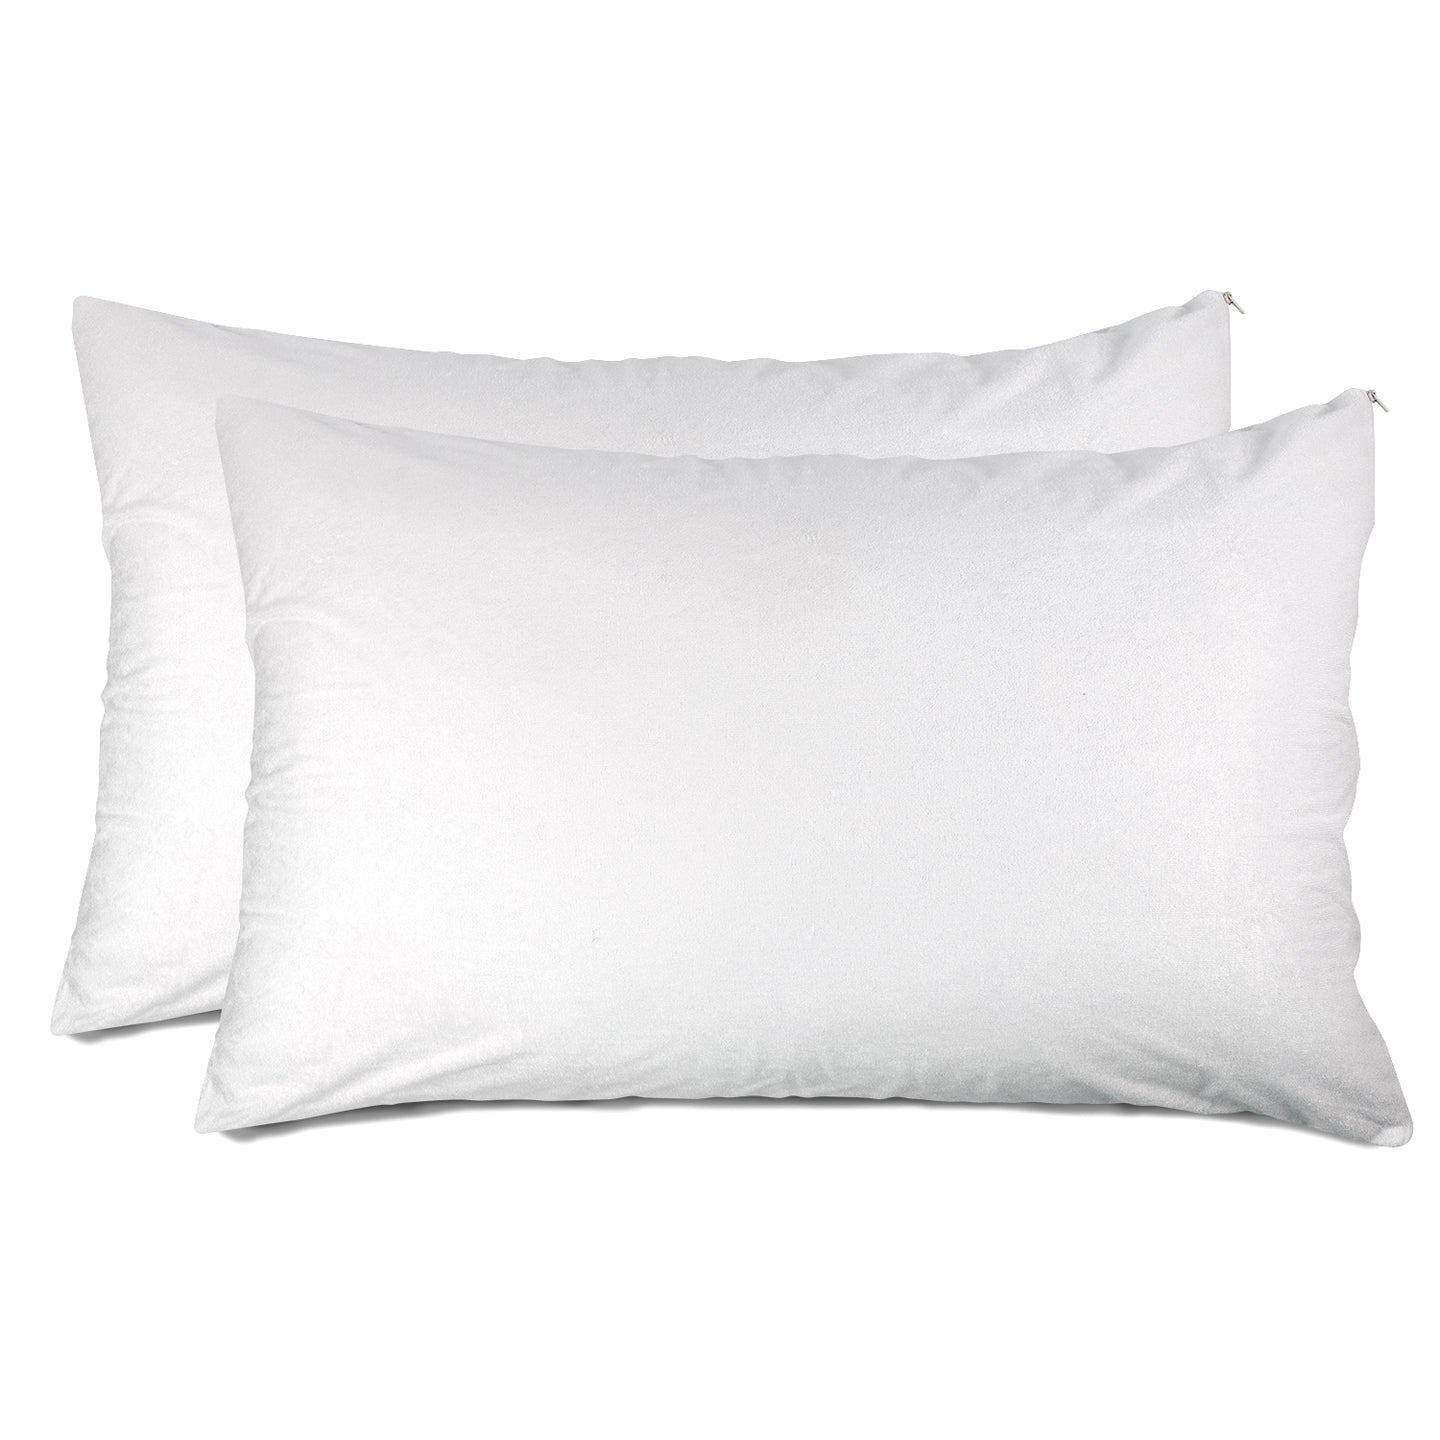 Cosy House Collection Luxury Bamboo Shredded Memory Foam Pillow - Adjustable & Removable Fill - Ultra Soft, Cool & Breathable Cover with Zipper